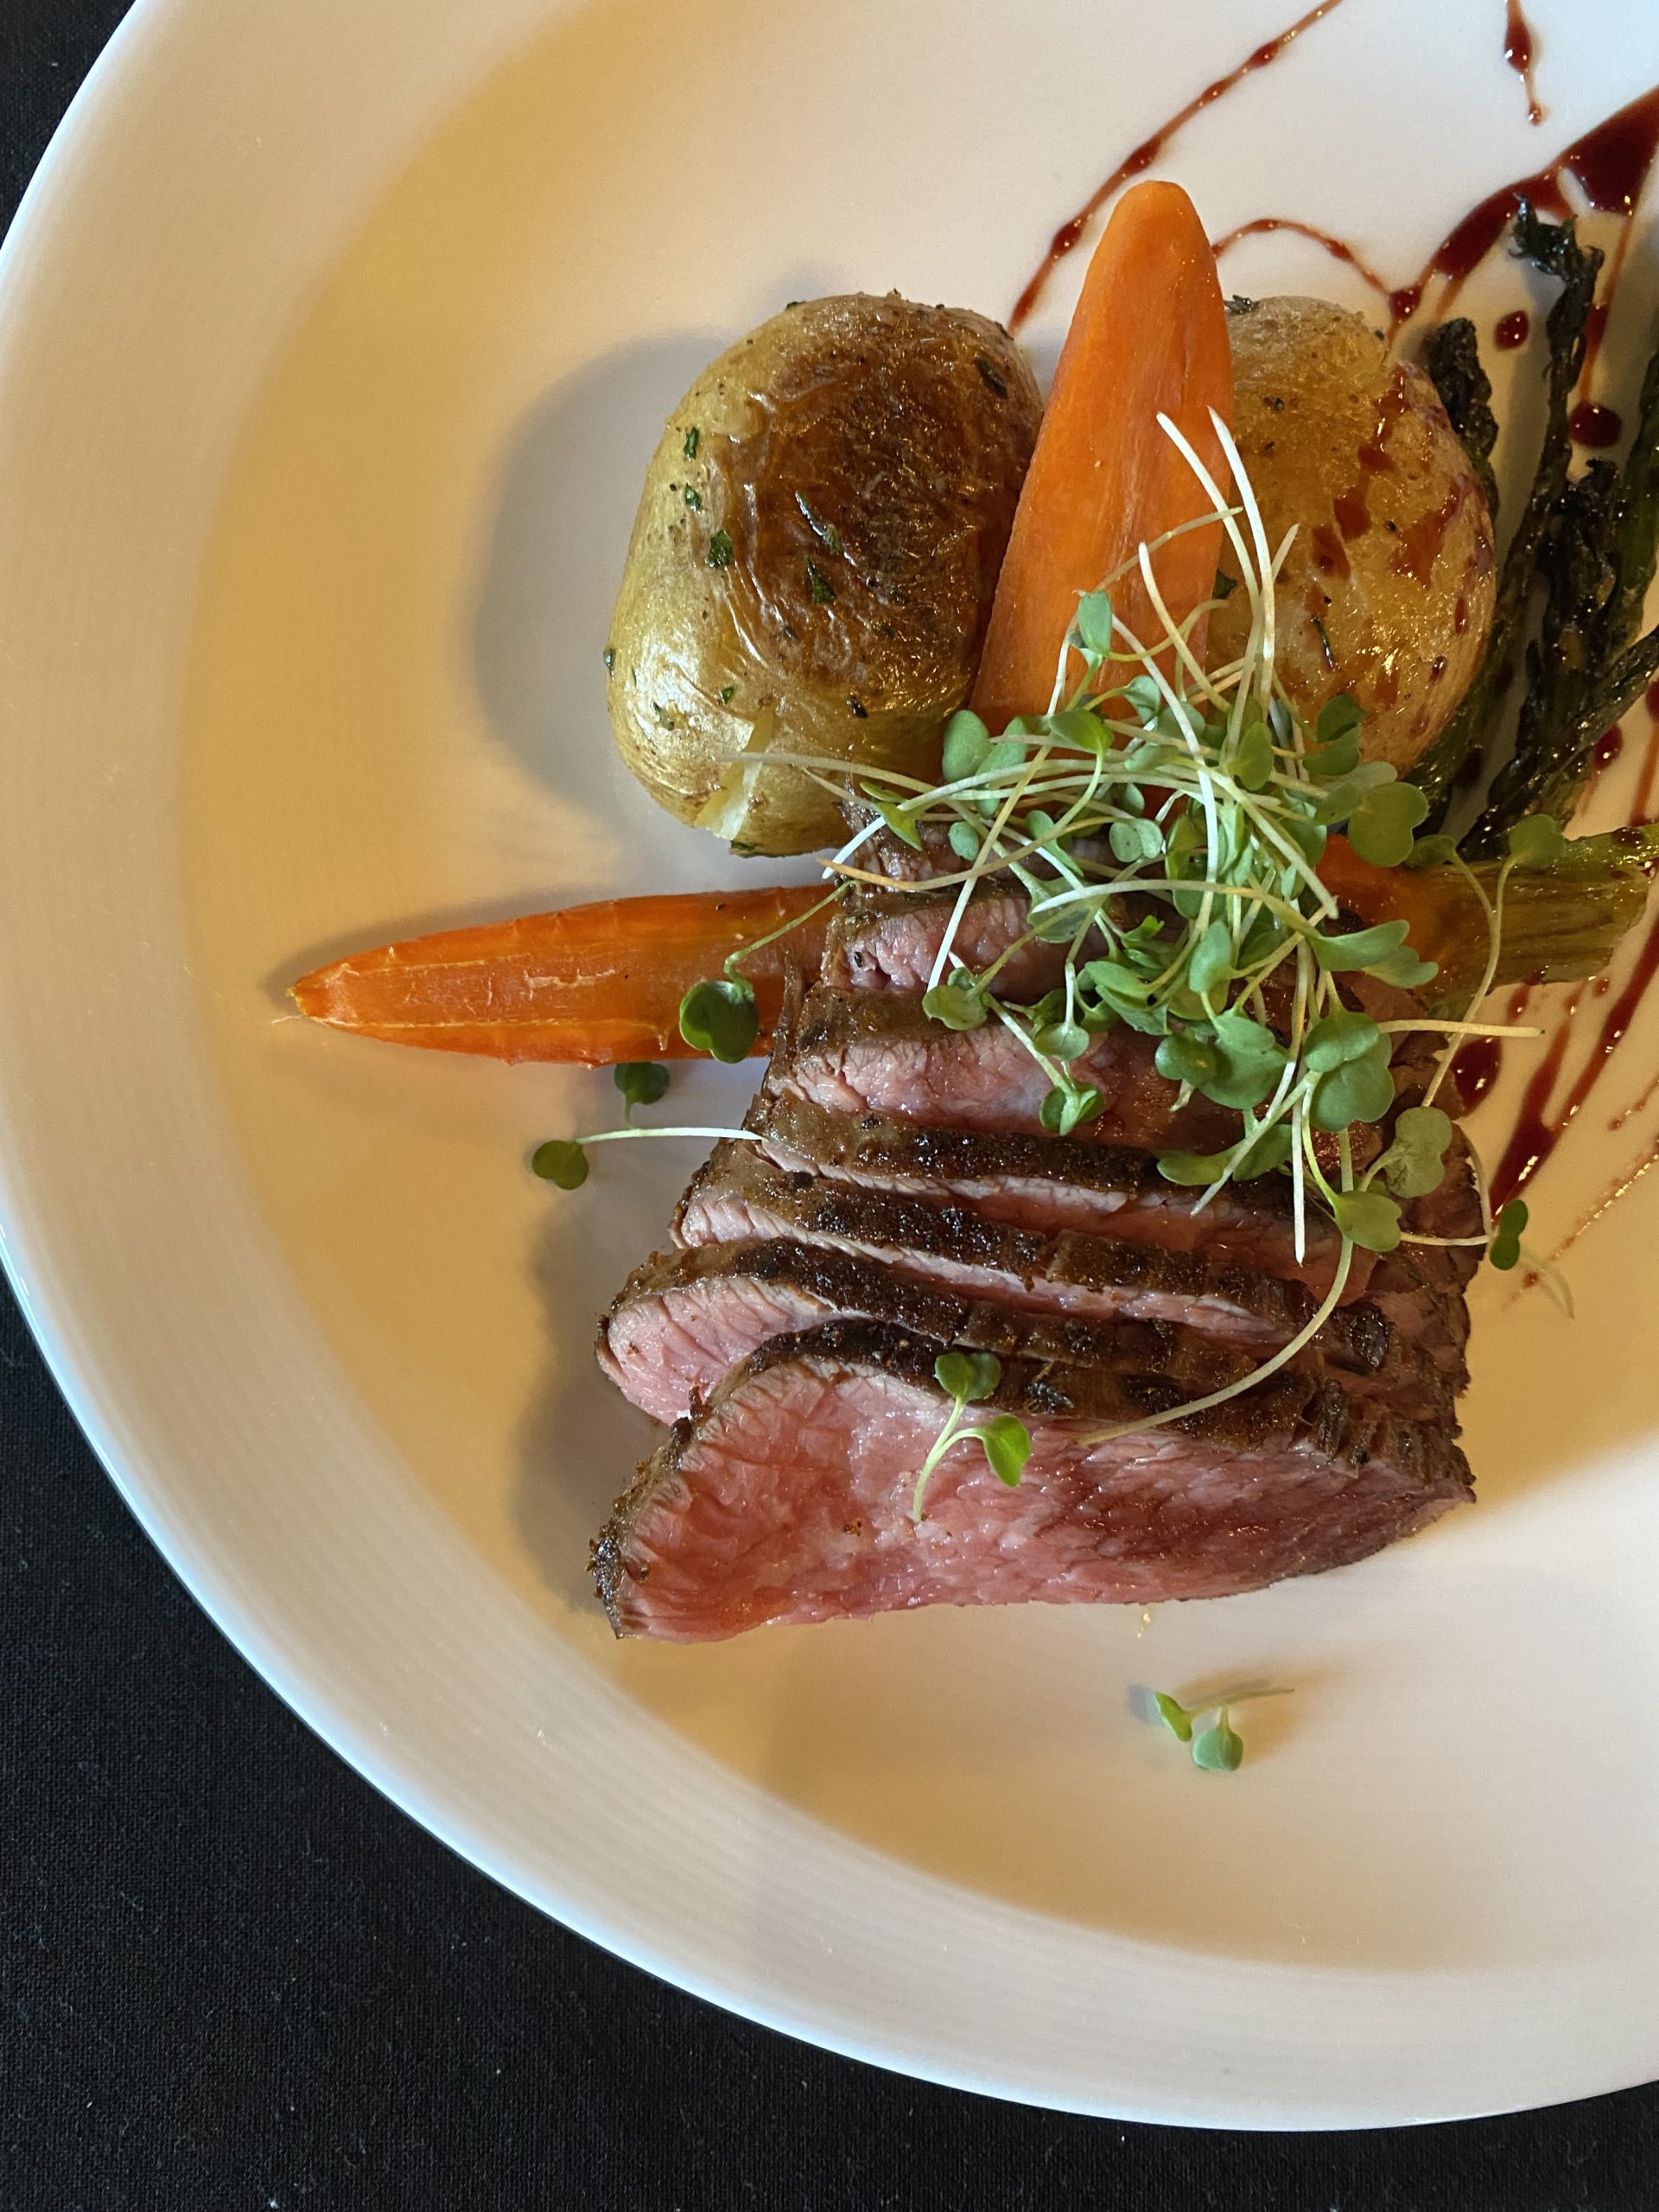 A beautiful spice seared Angus sirloin with Trione red wine glazed baby carrots, roasted delta asparagus, brown clamshell mushrooms, and a rich demi glace.